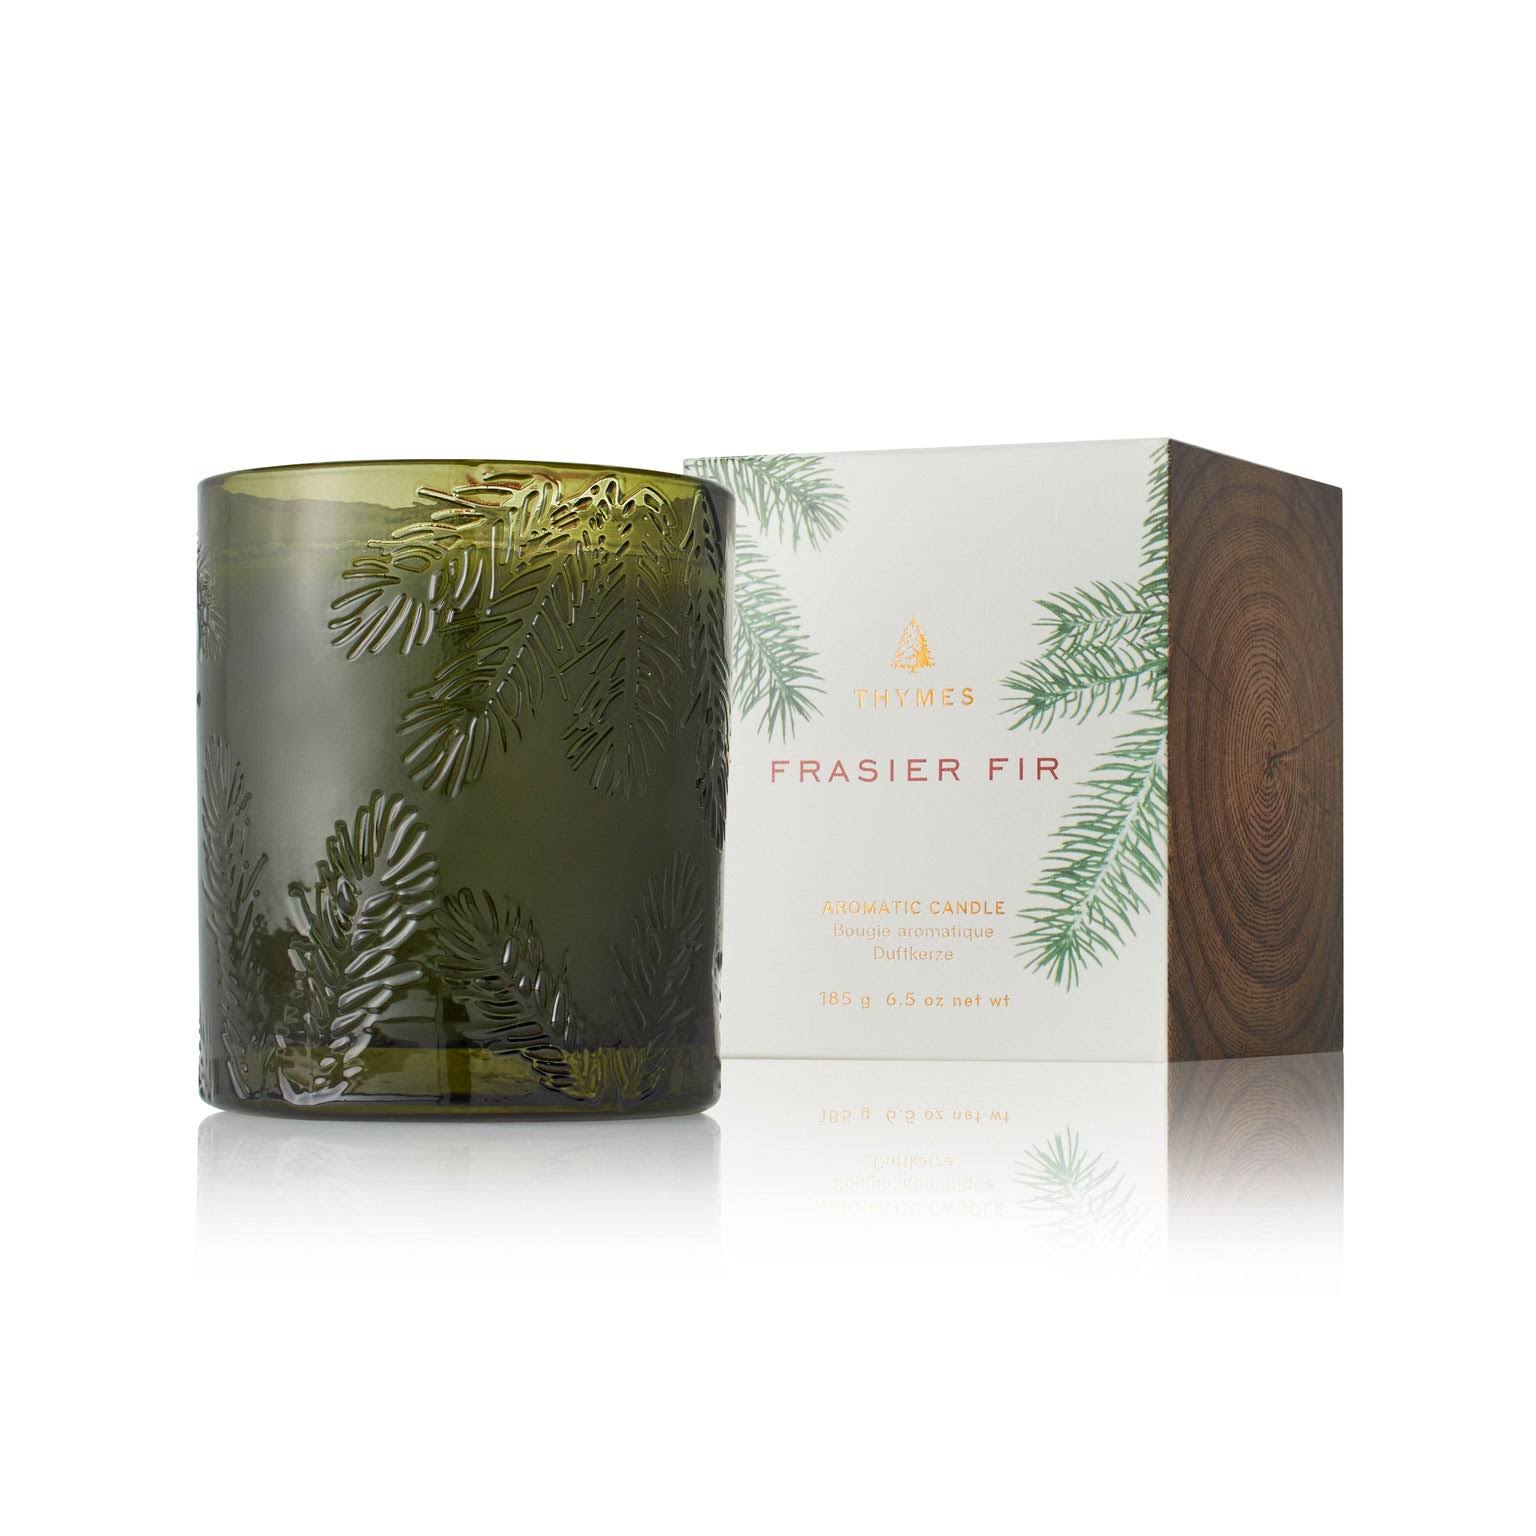 Thymes Aromatic Candle (Green Glass) Frasier Fir 185g/6.5oz